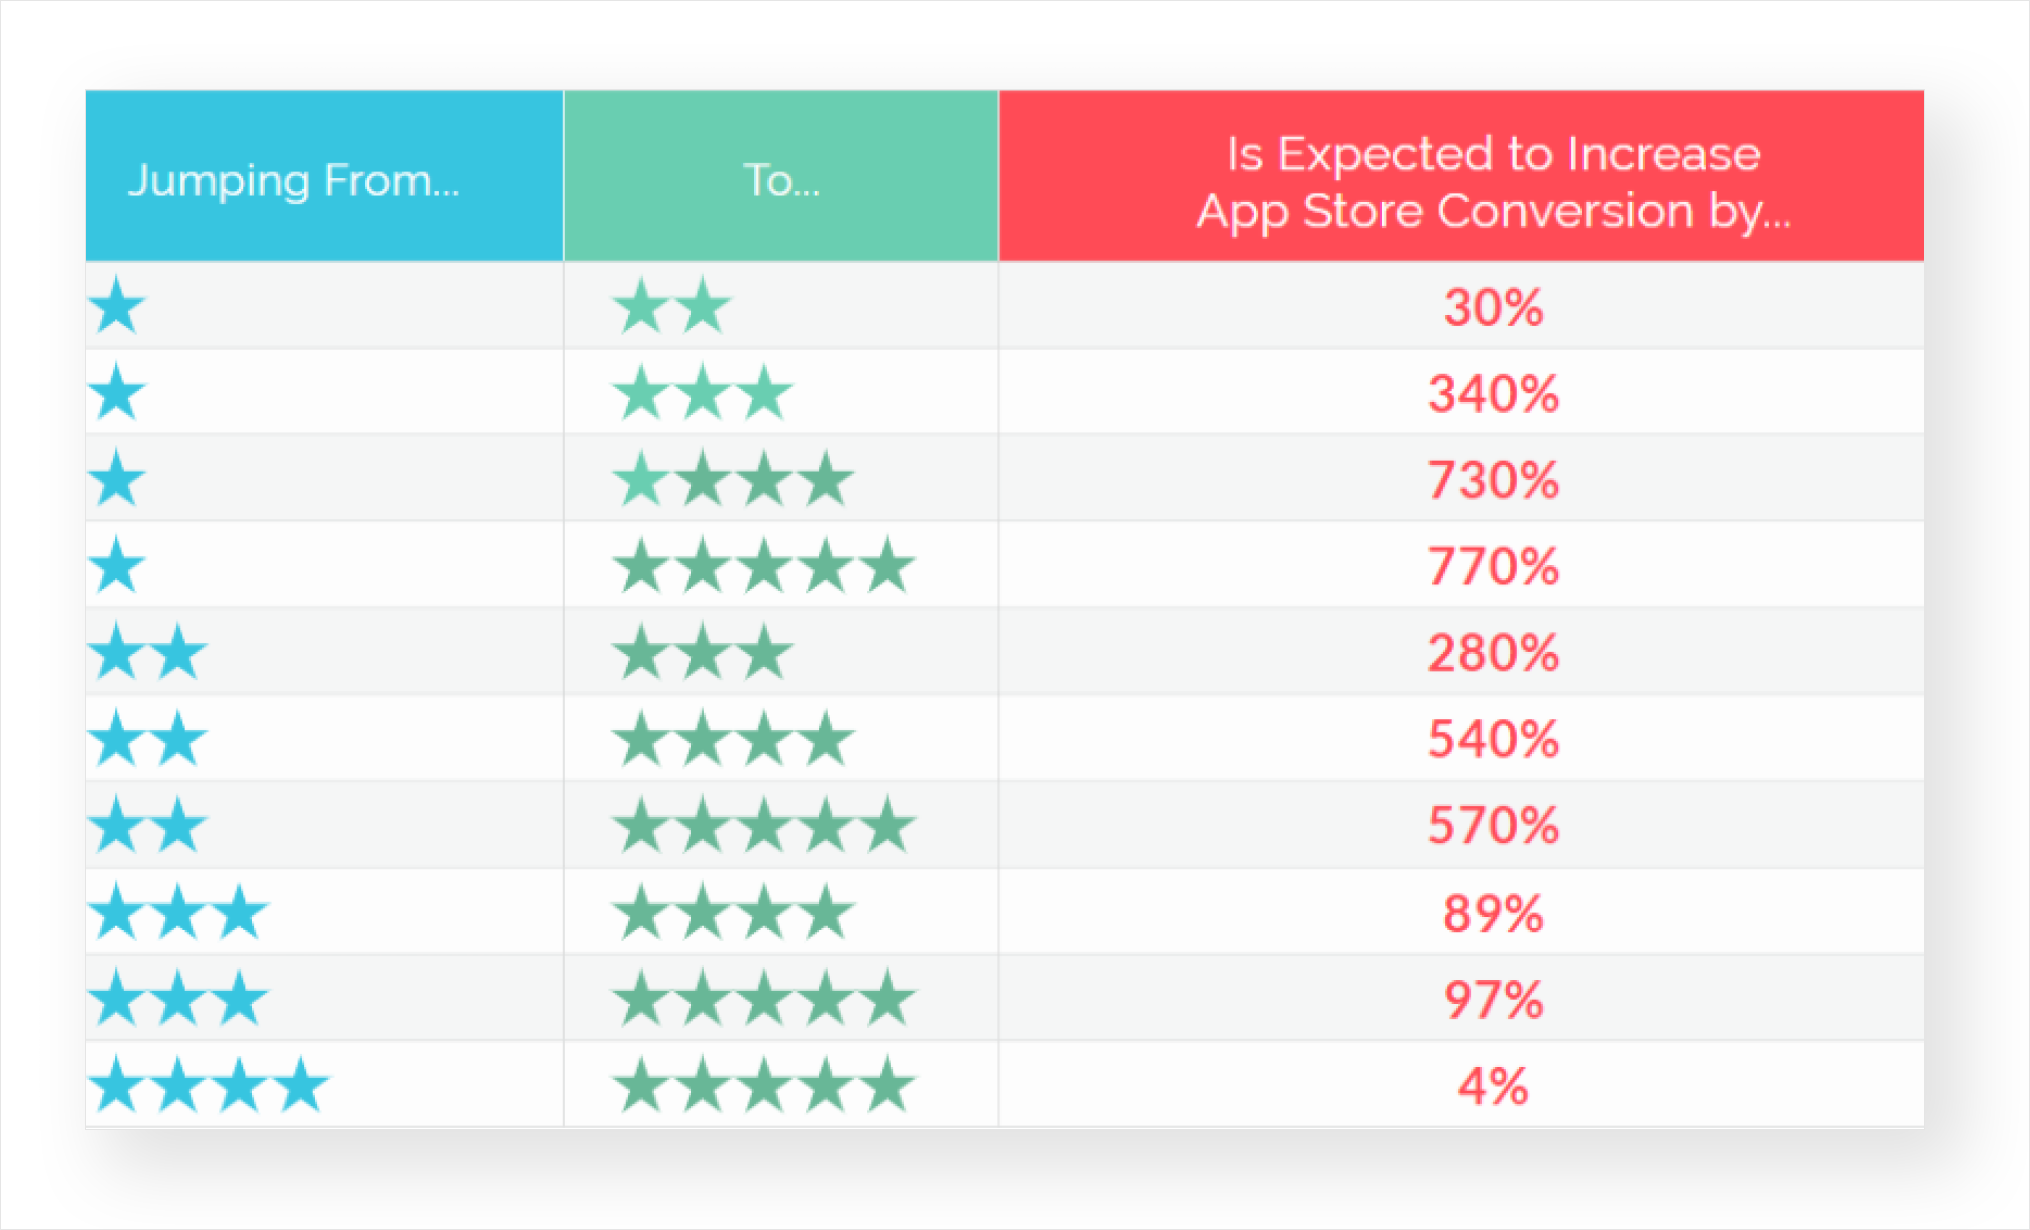 How to see all your App Store ratings and reviews